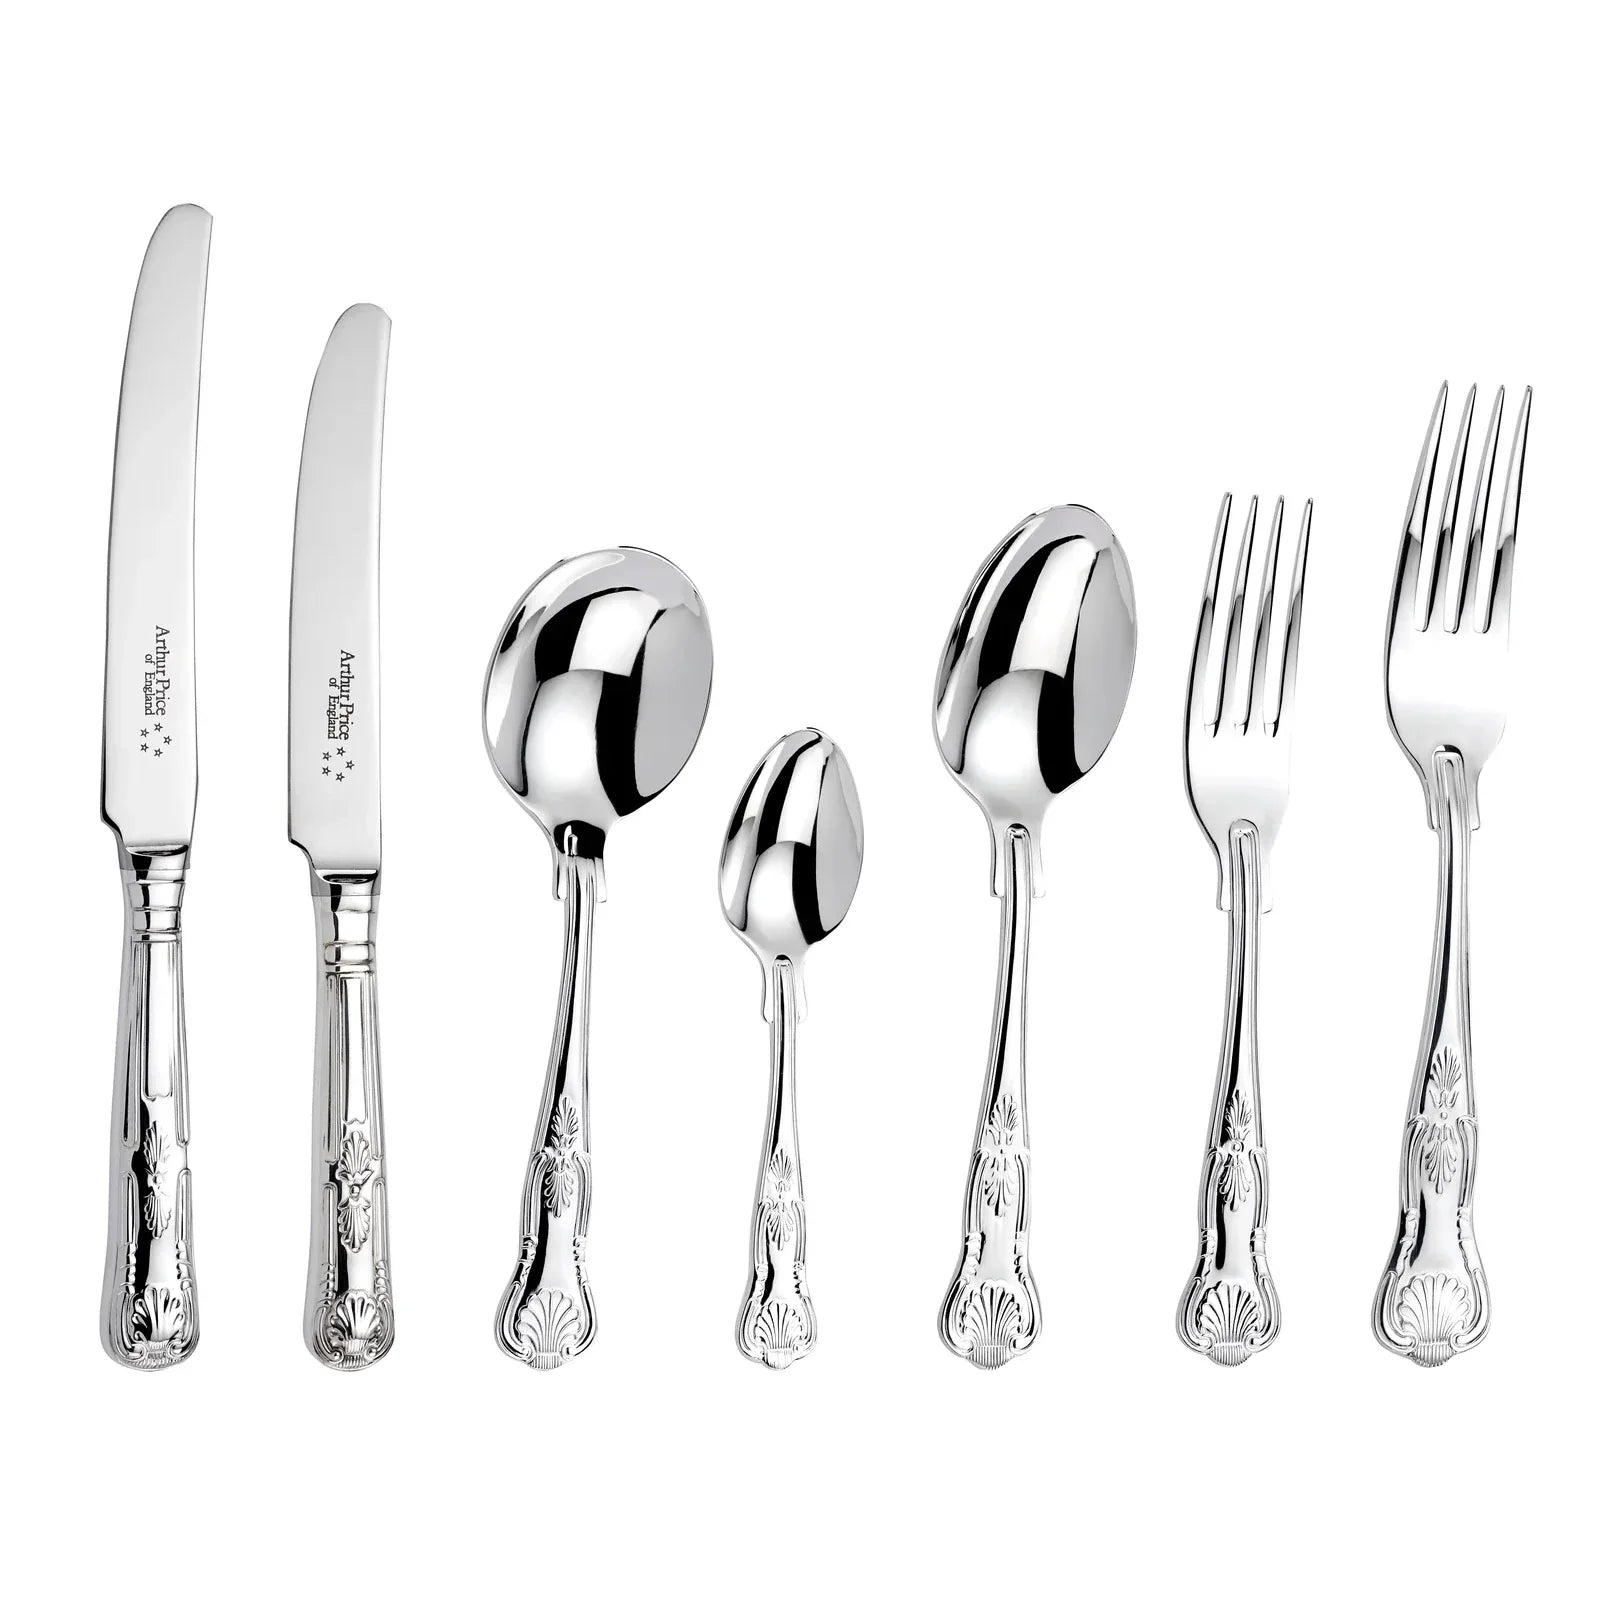 Arthur Price Sovereign Stainless Steel Kings 44 Piece Canteen